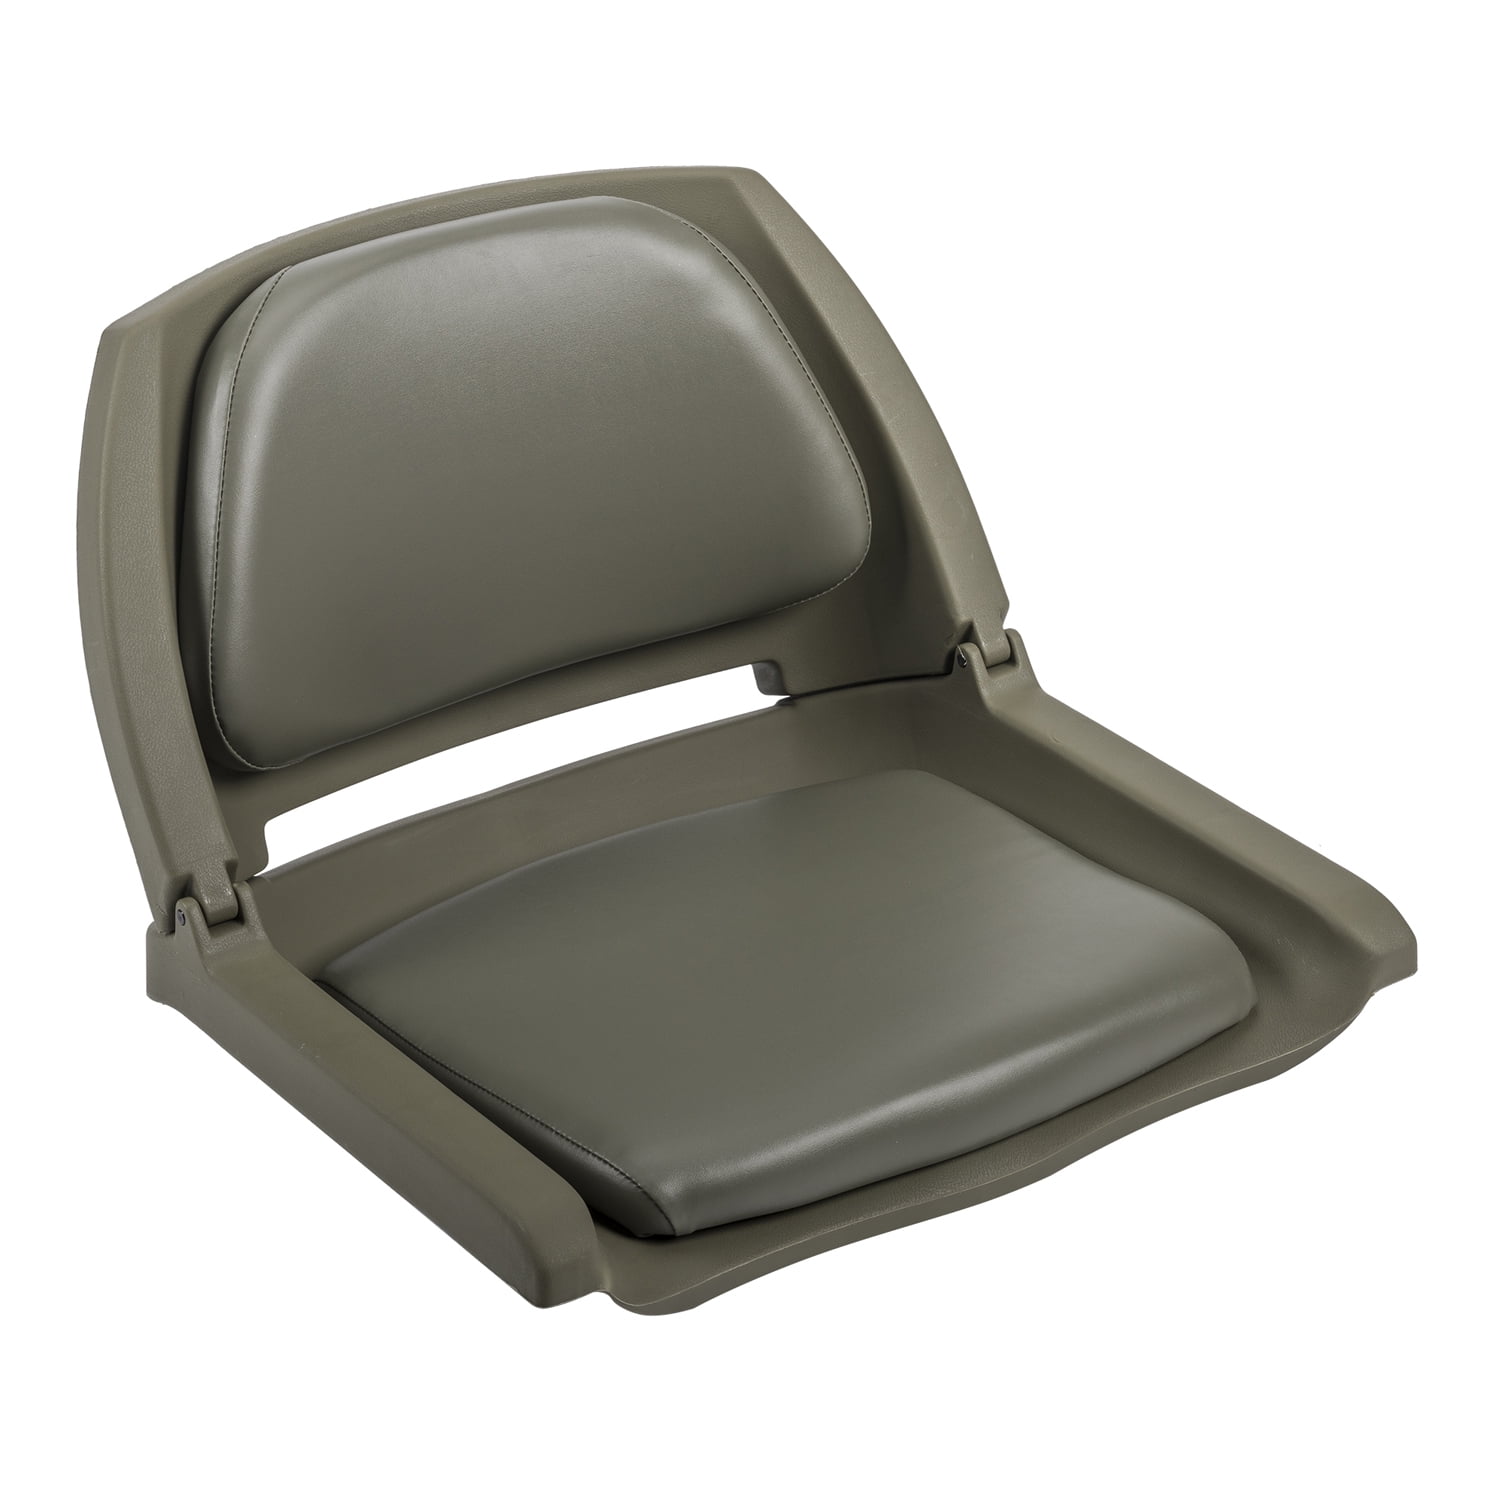 Wise Folding Plastic Seat - Green Shell 8WD139LS-940